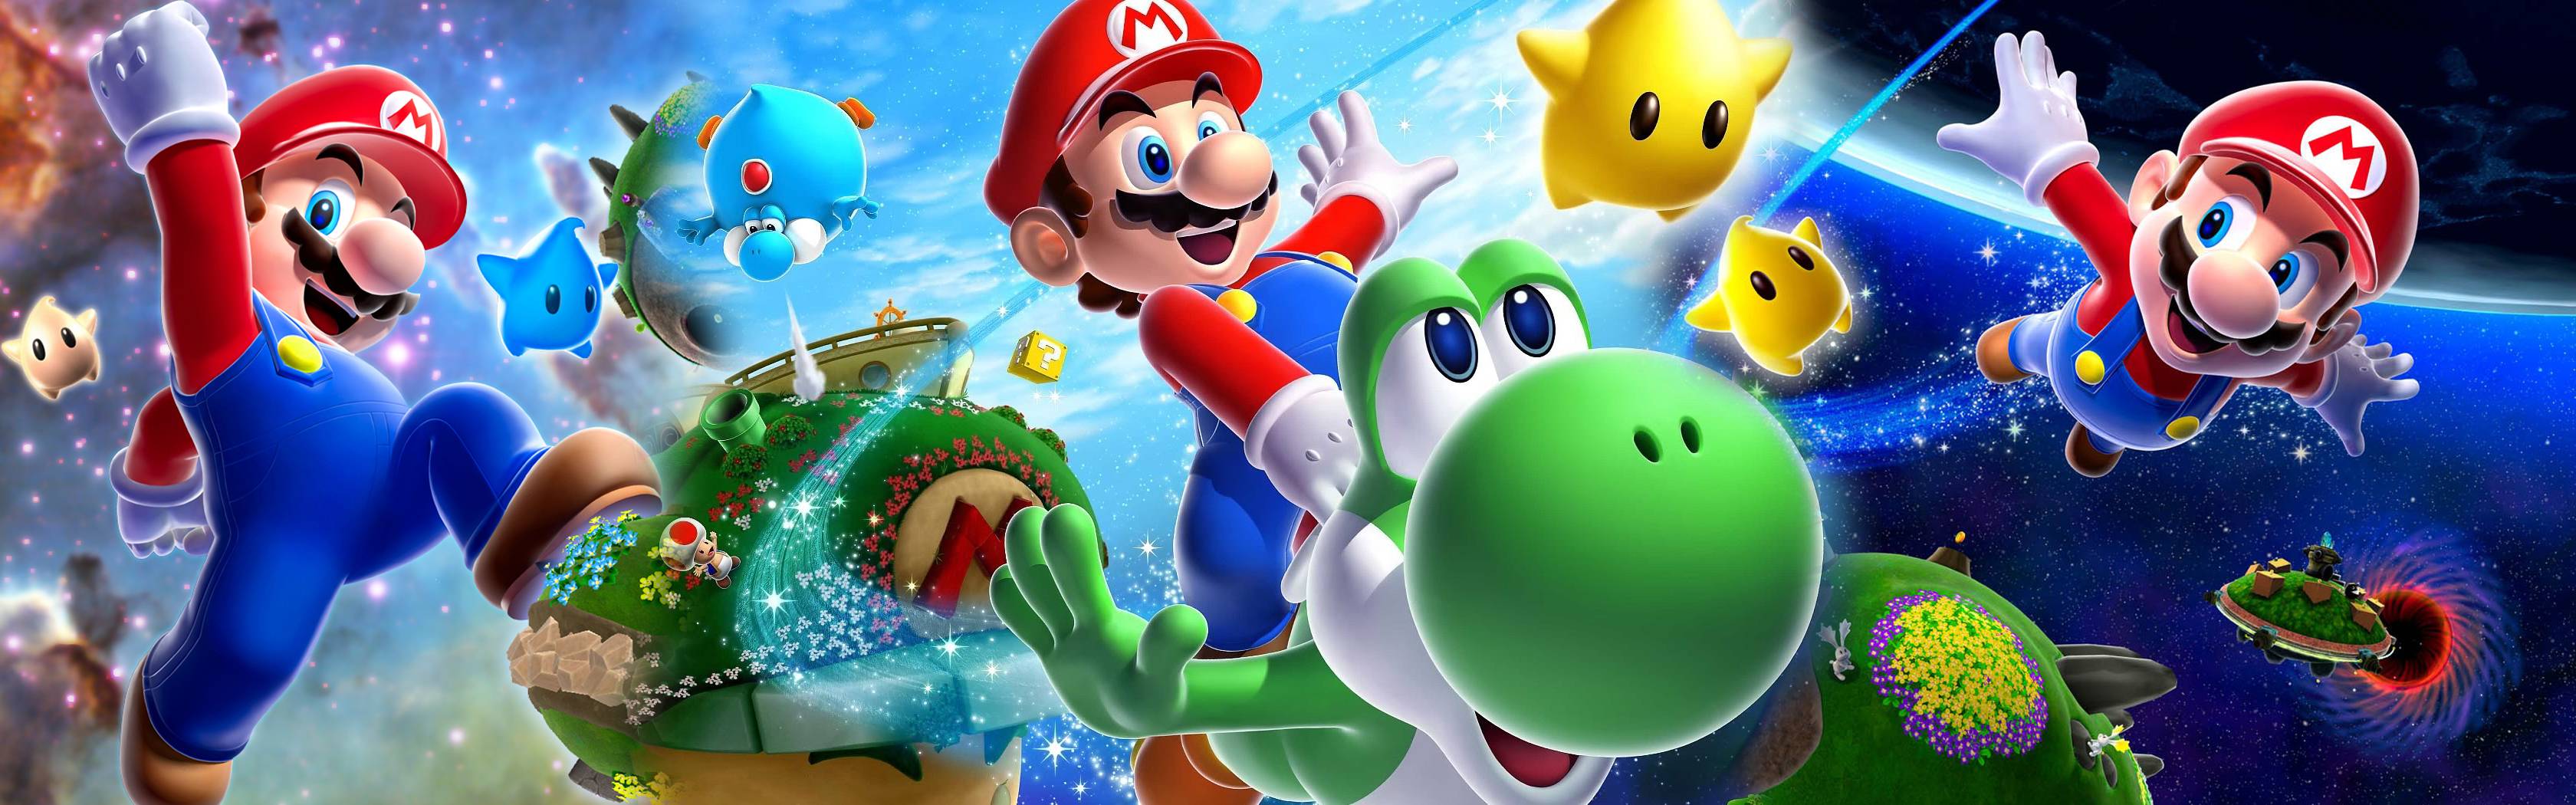 Super Mario Wallpapers 2014 for facebook cover